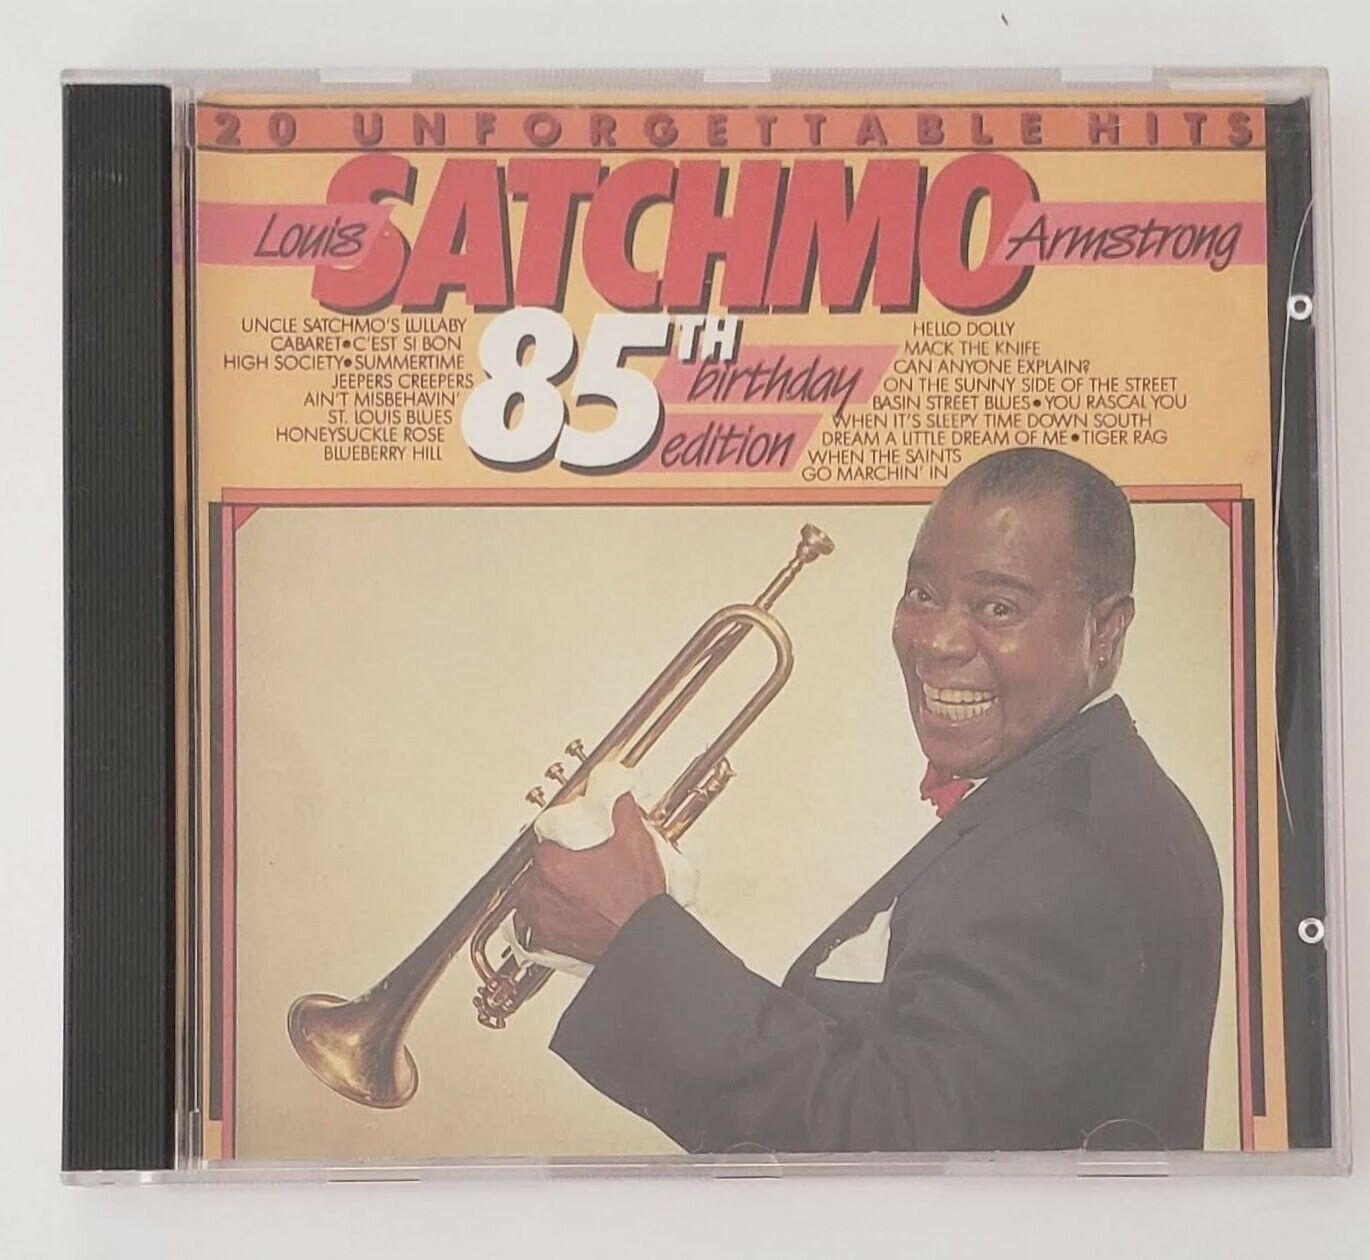 Louis "Satchmo" Armstrong 20 Unforgettable Hits 85th Birthday Edition CD